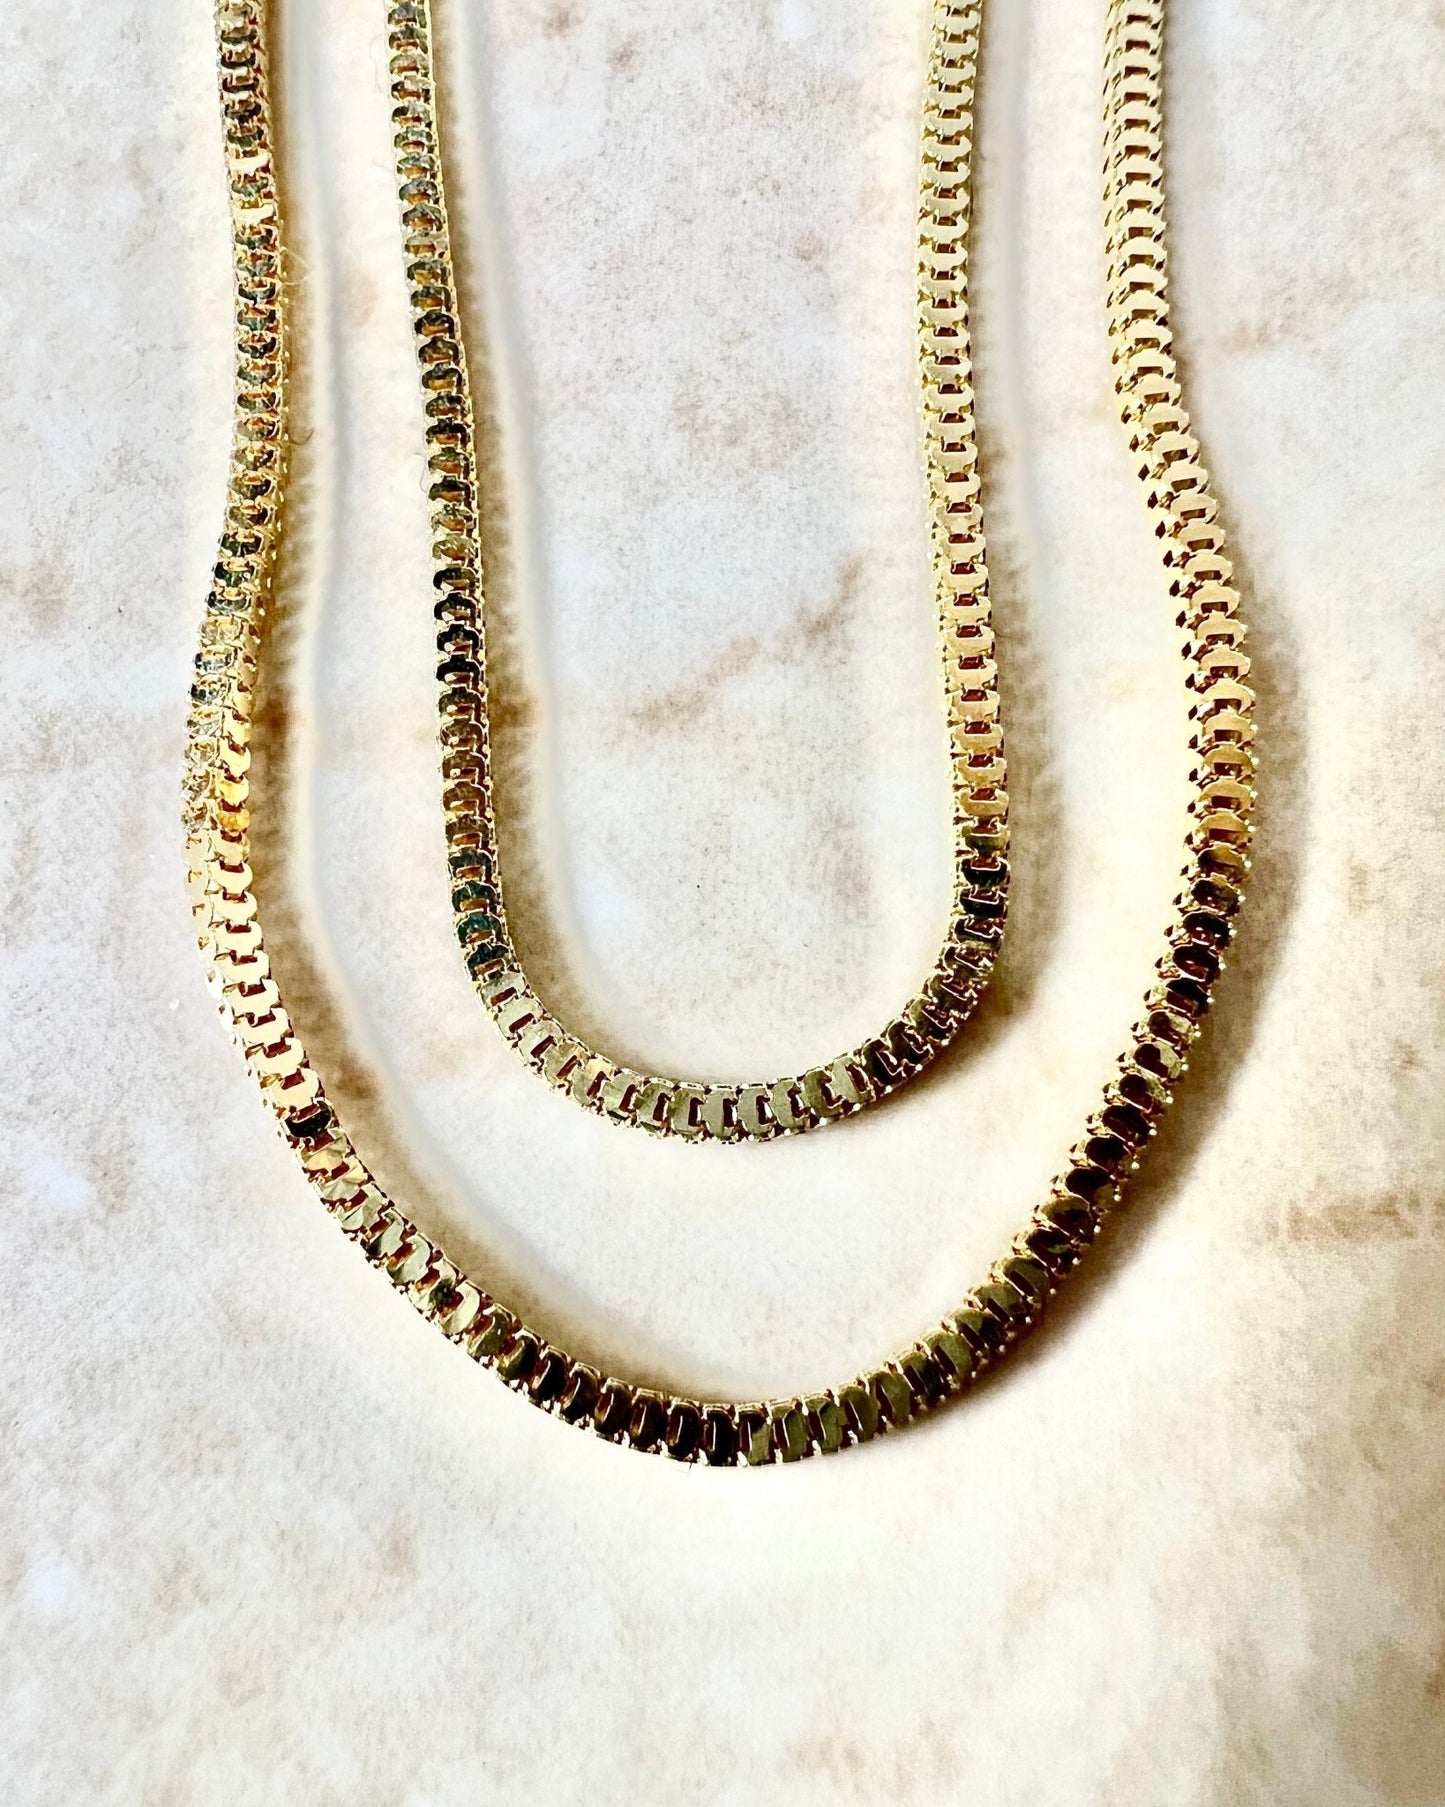 14K Yellow Gold Box Chain - 19” Gold Chain - Yellow Gold Necklace - Specialty Gold Chain Necklace - Best Gifts For Her - 14K Gold Chain